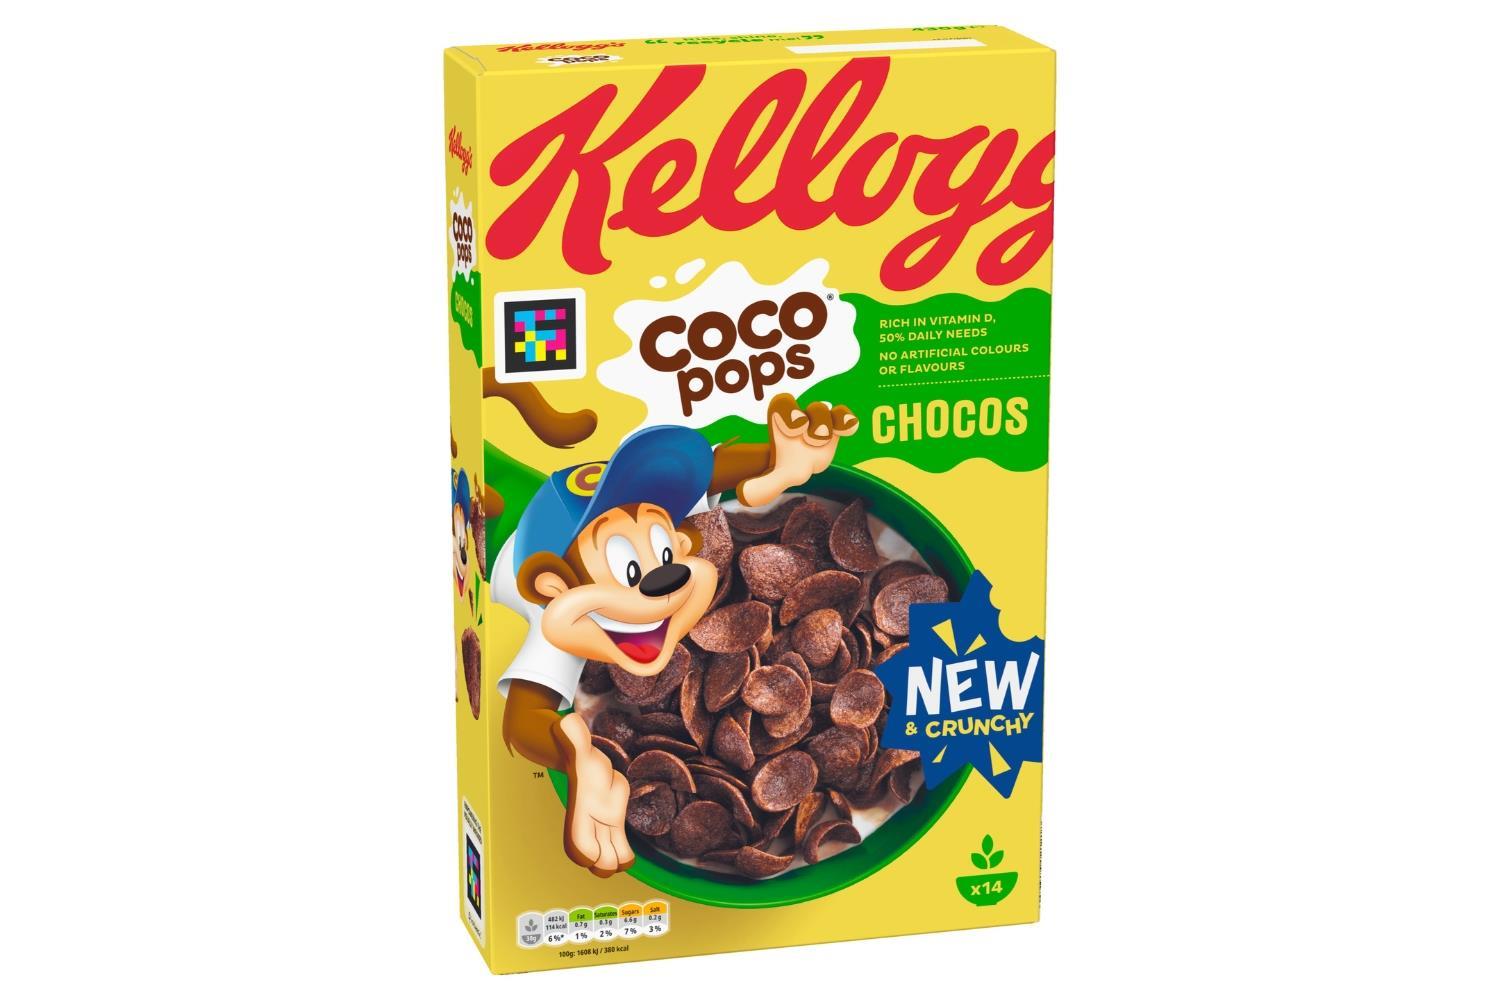 Kellogg's adds non-HFSS Chocos Coco Pops offering | News | The Grocer